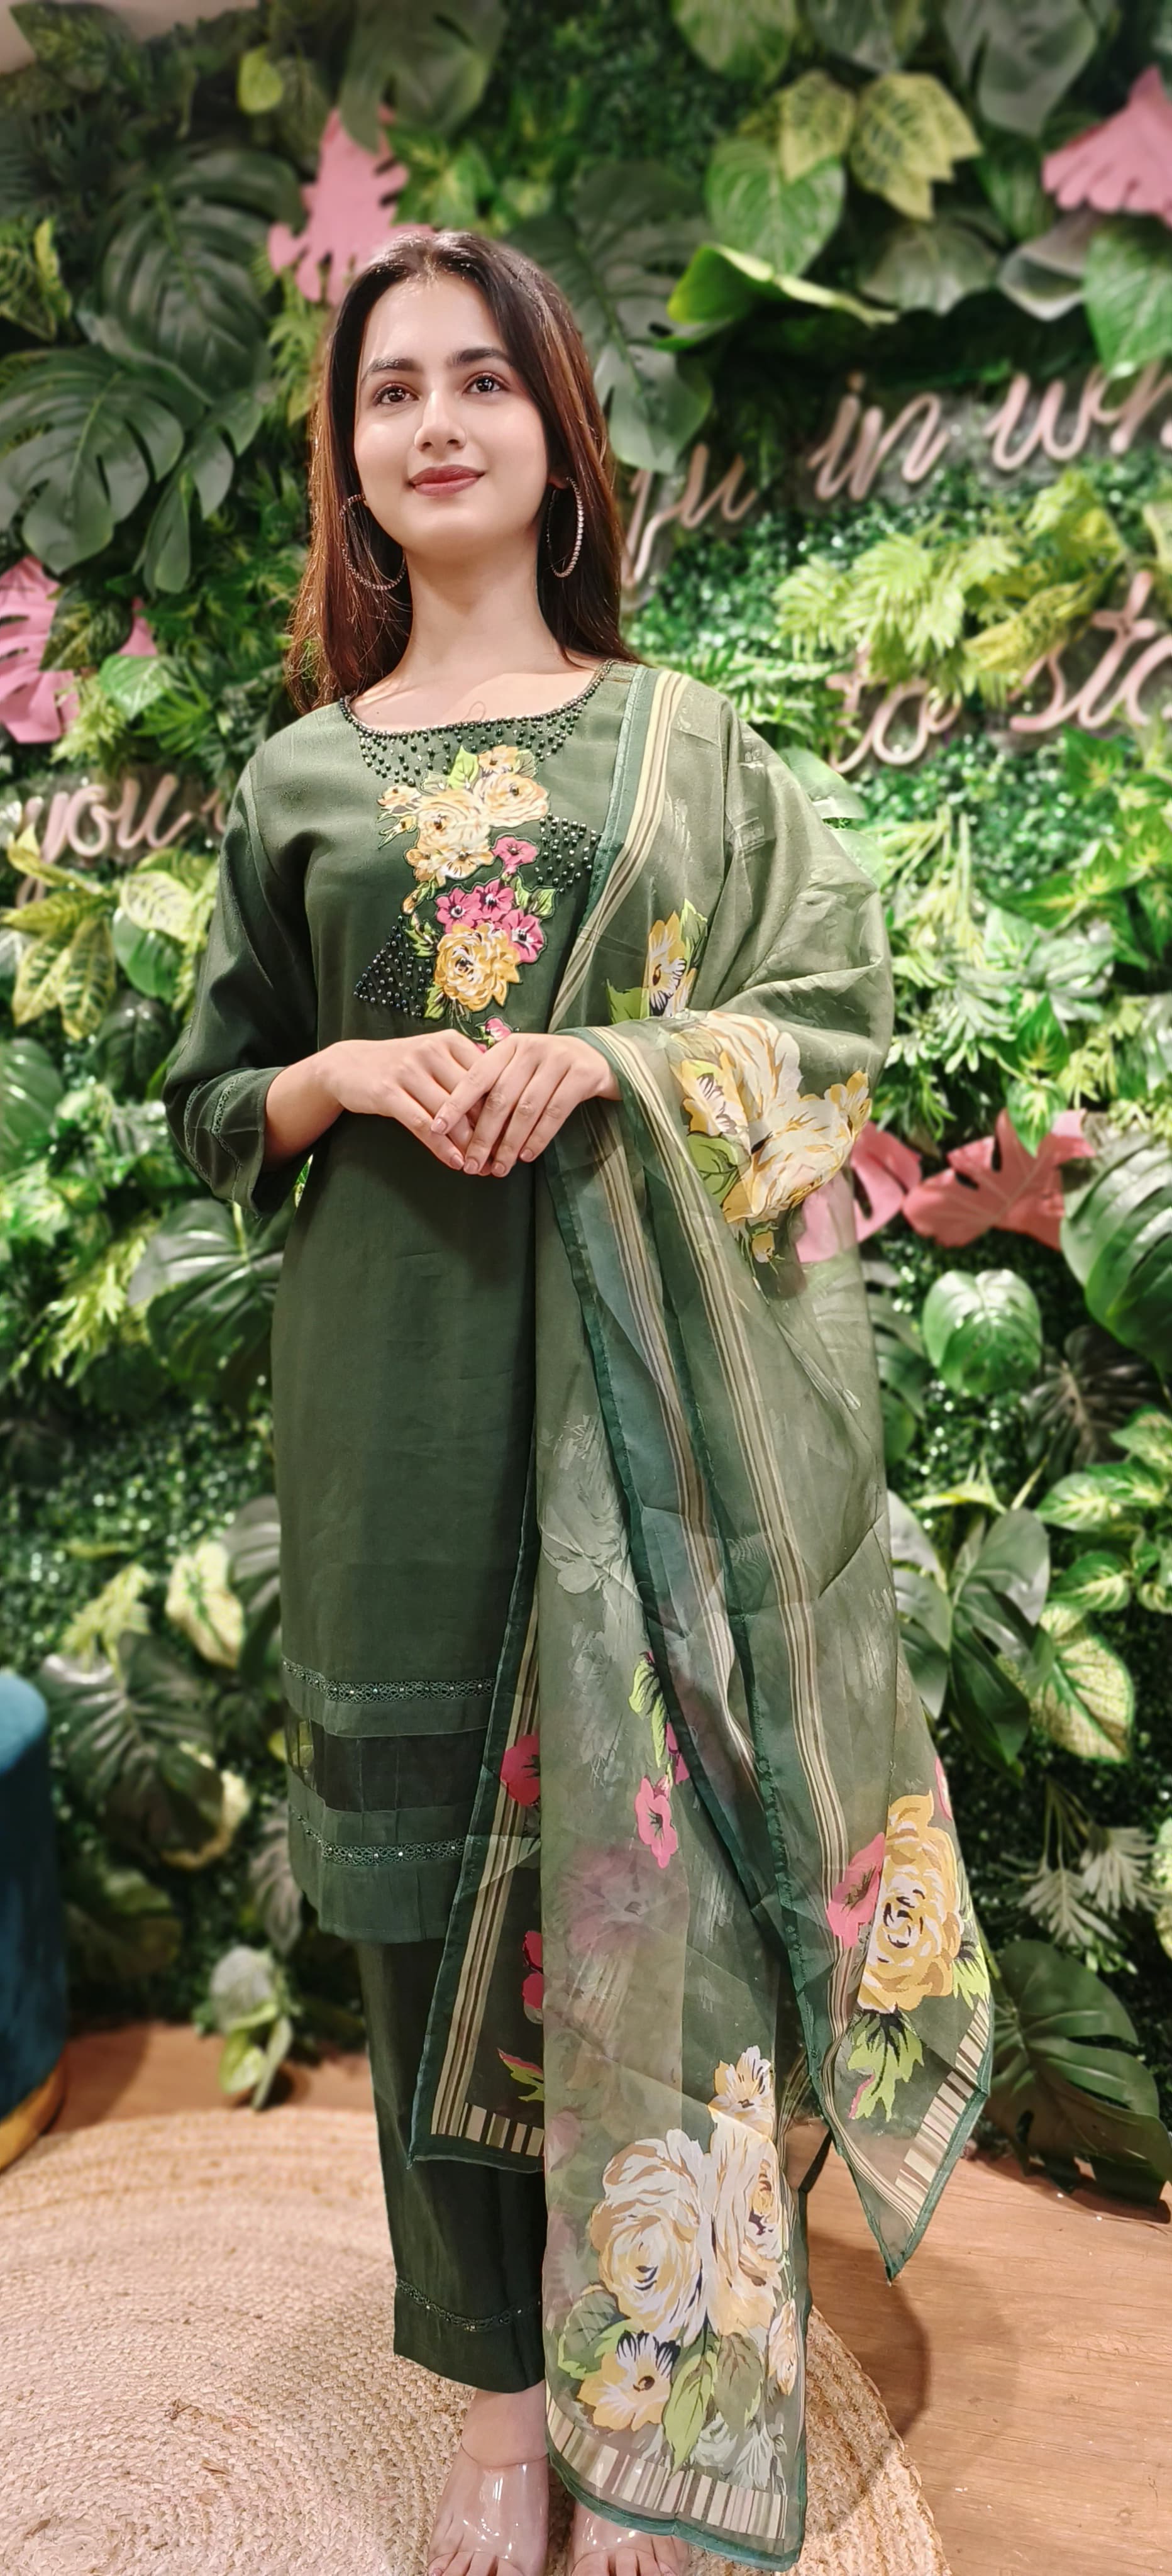 Cotton Silk Solid Shade Patch Work Full Suit Set With Floral Floral Orangza Dupatta-04542